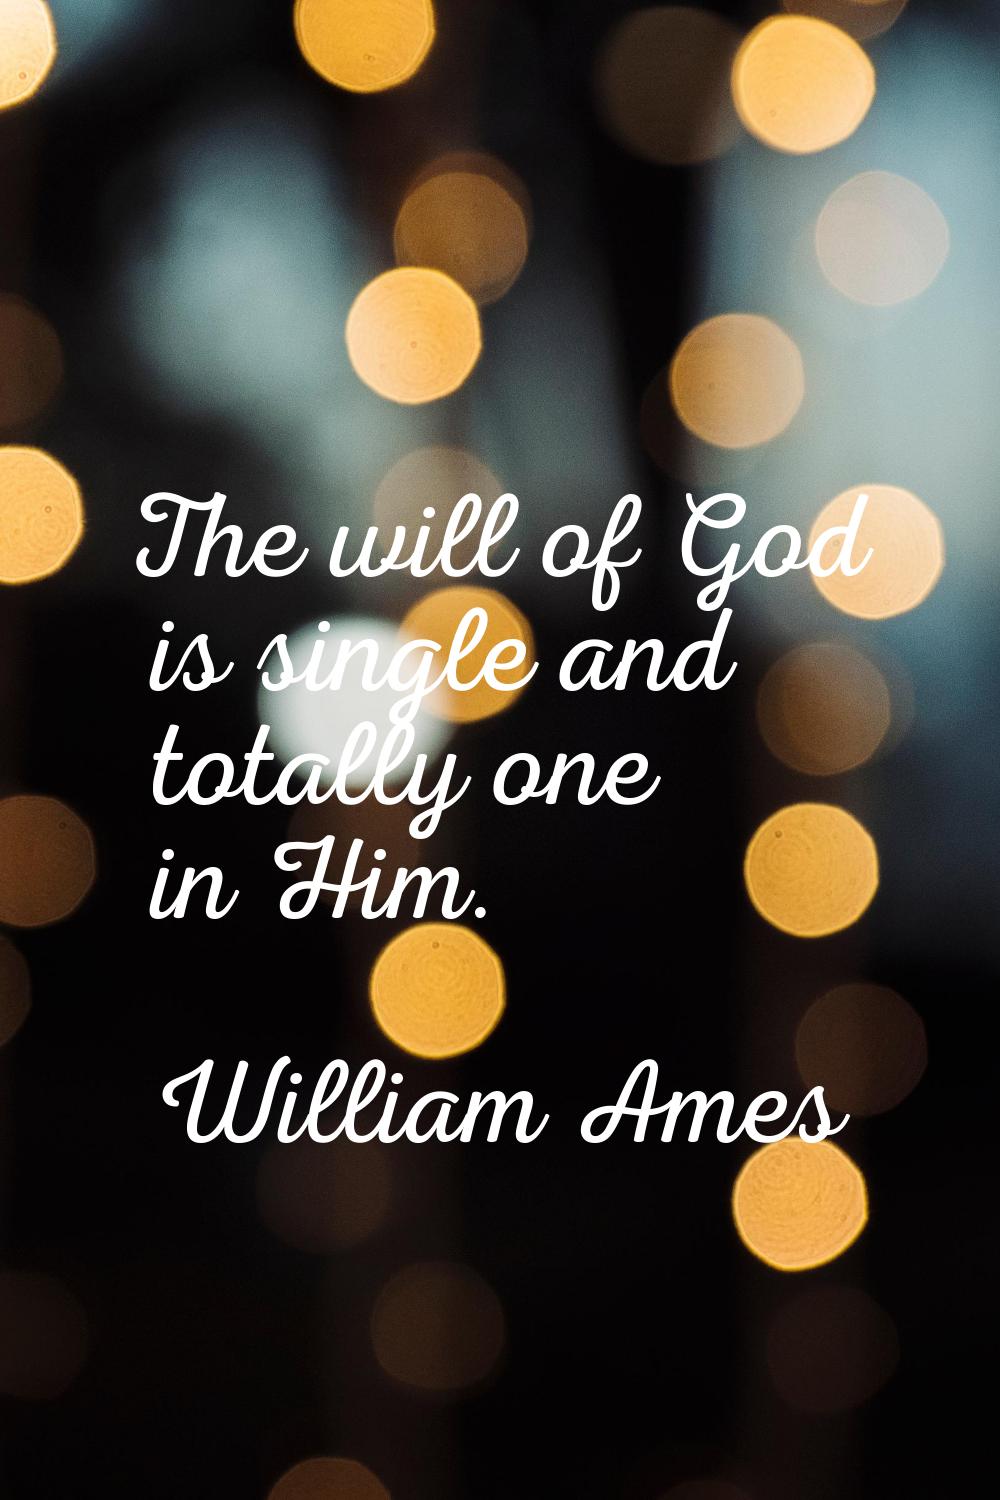 The will of God is single and totally one in Him.